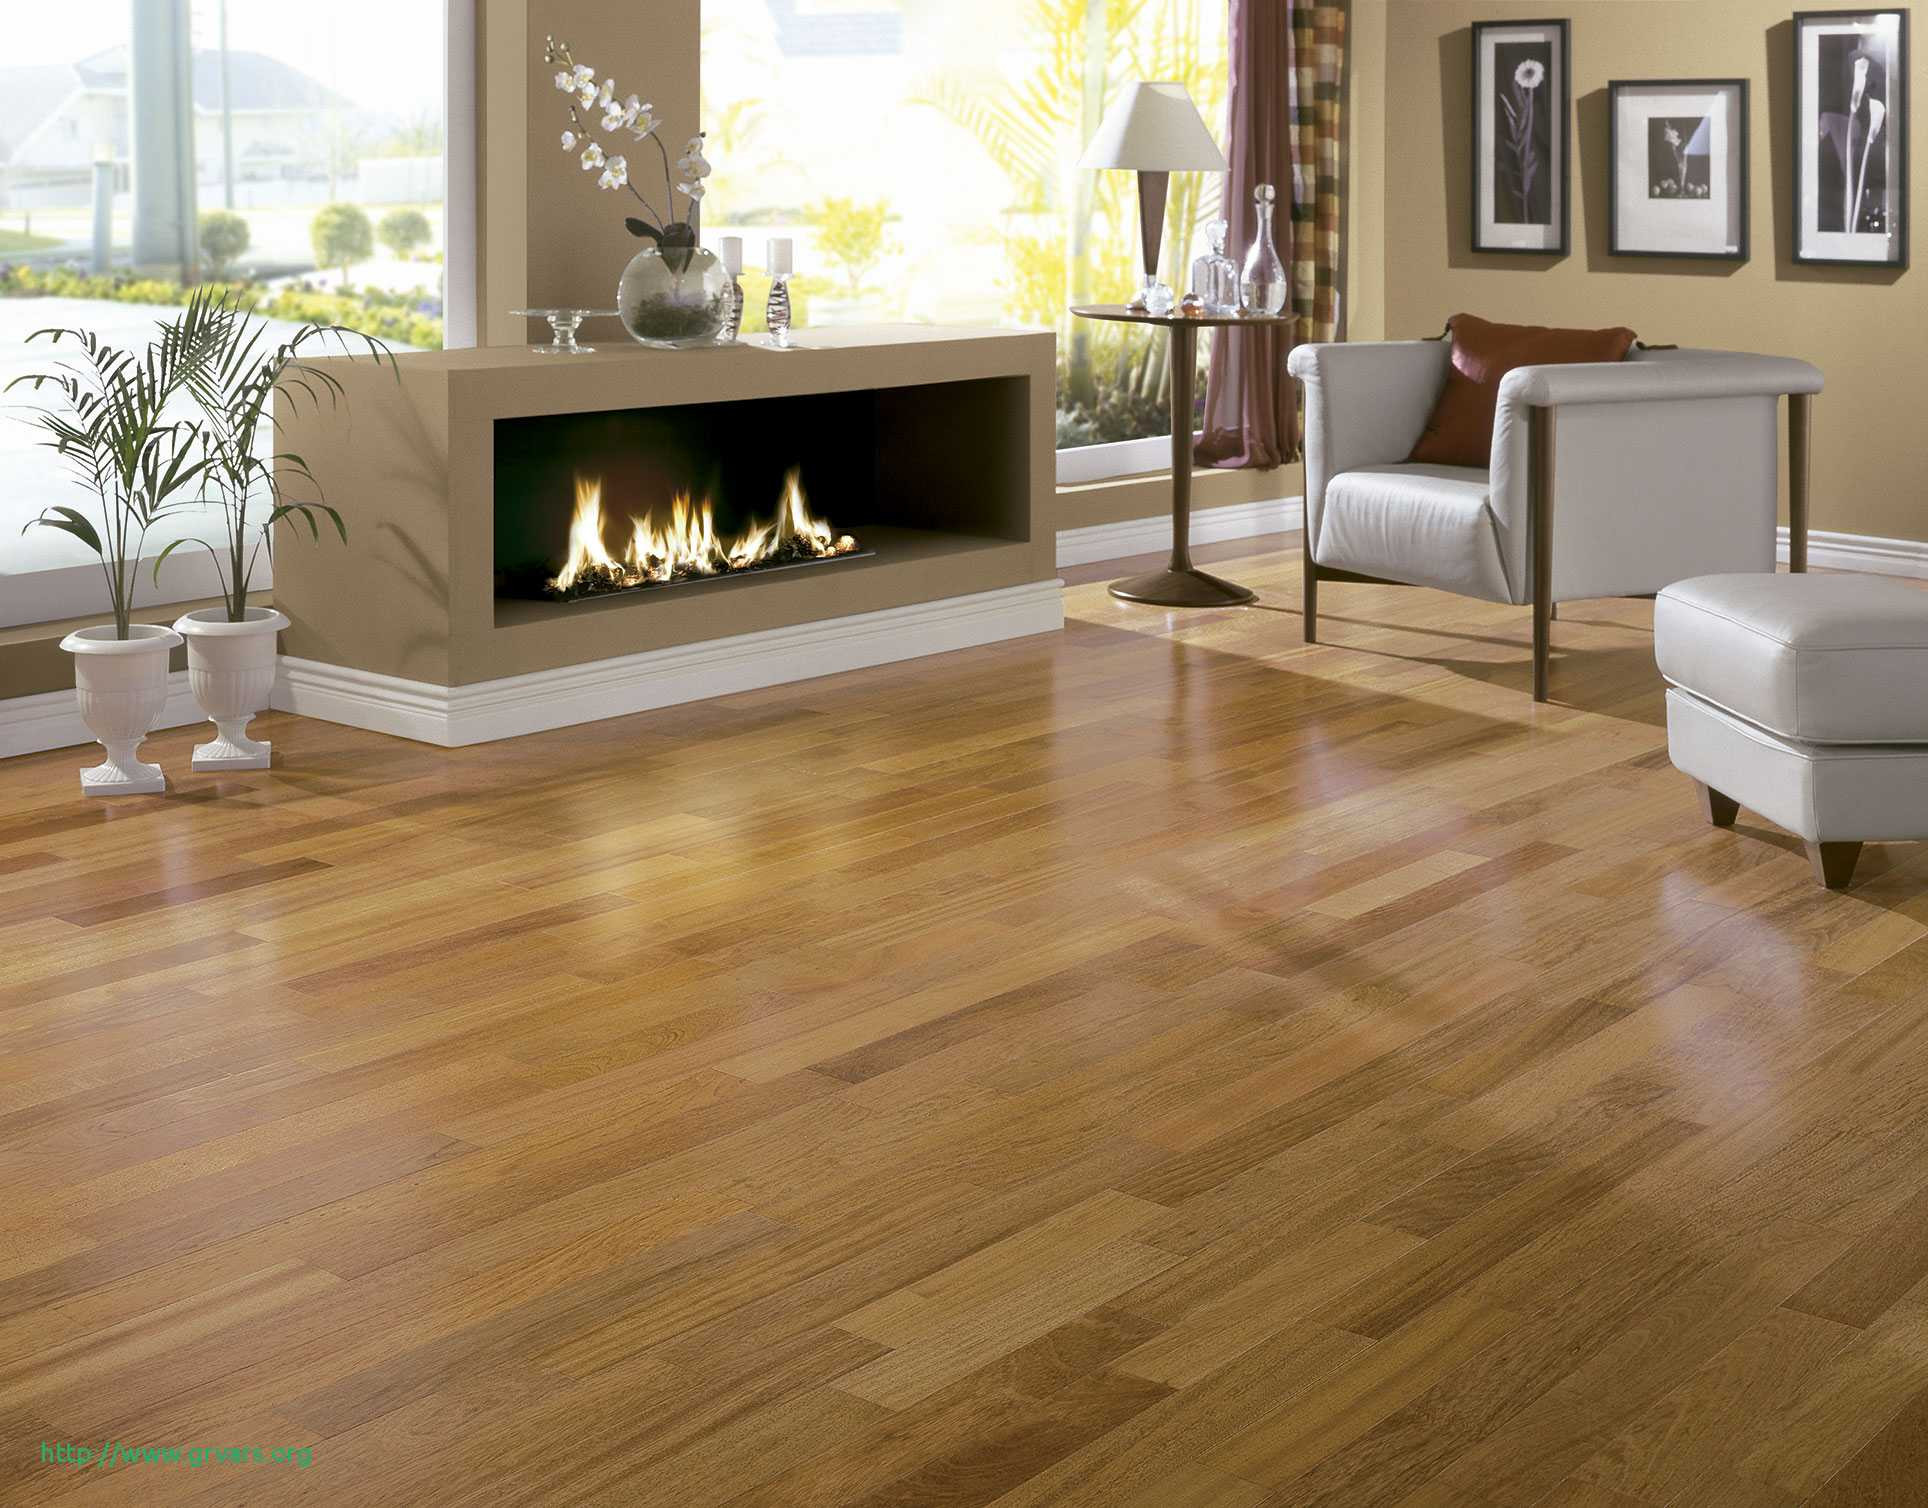 29 Spectacular Project source 5 In Brown Oak Hardwood Flooring 2024 free download project source 5 in brown oak hardwood flooring of 18 frais how to put down hardwood flooring ideas blog within full size of bedroom cute discount hardwood flooring 6 brazilian cherry 1920x1